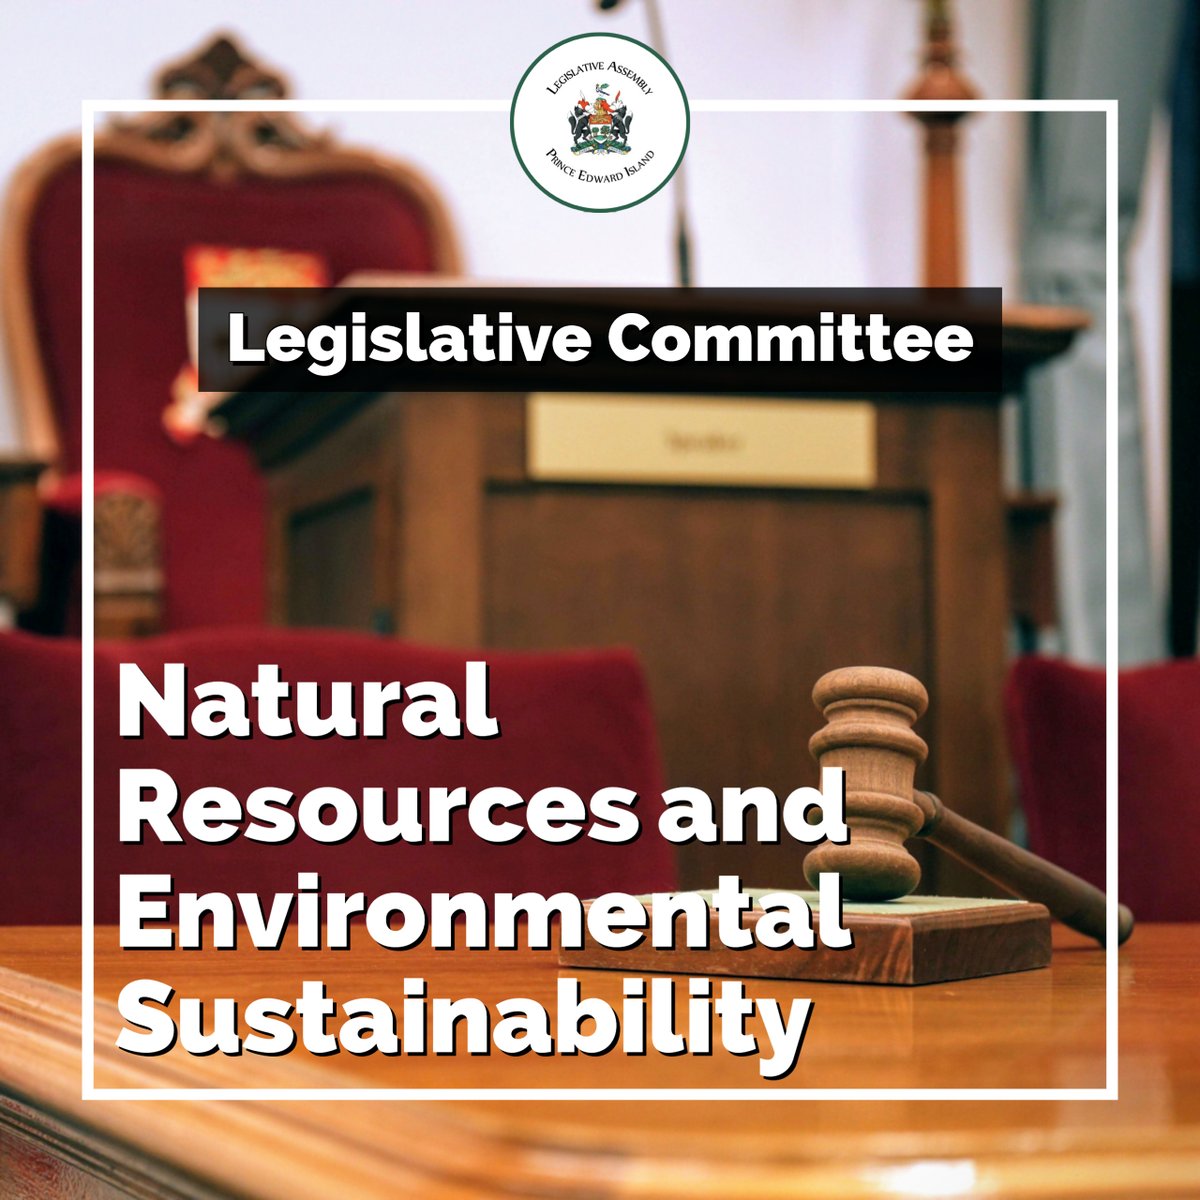 Tune in now for the Standing Committee on Natural Resources and Environmental Sustainability. Today’s topic: Briefing from Maritime Electric. Watch at: assembly.pe.ca, the Legislative Assembly Facebook page and on YouTube at PEI Legislative Assembly.